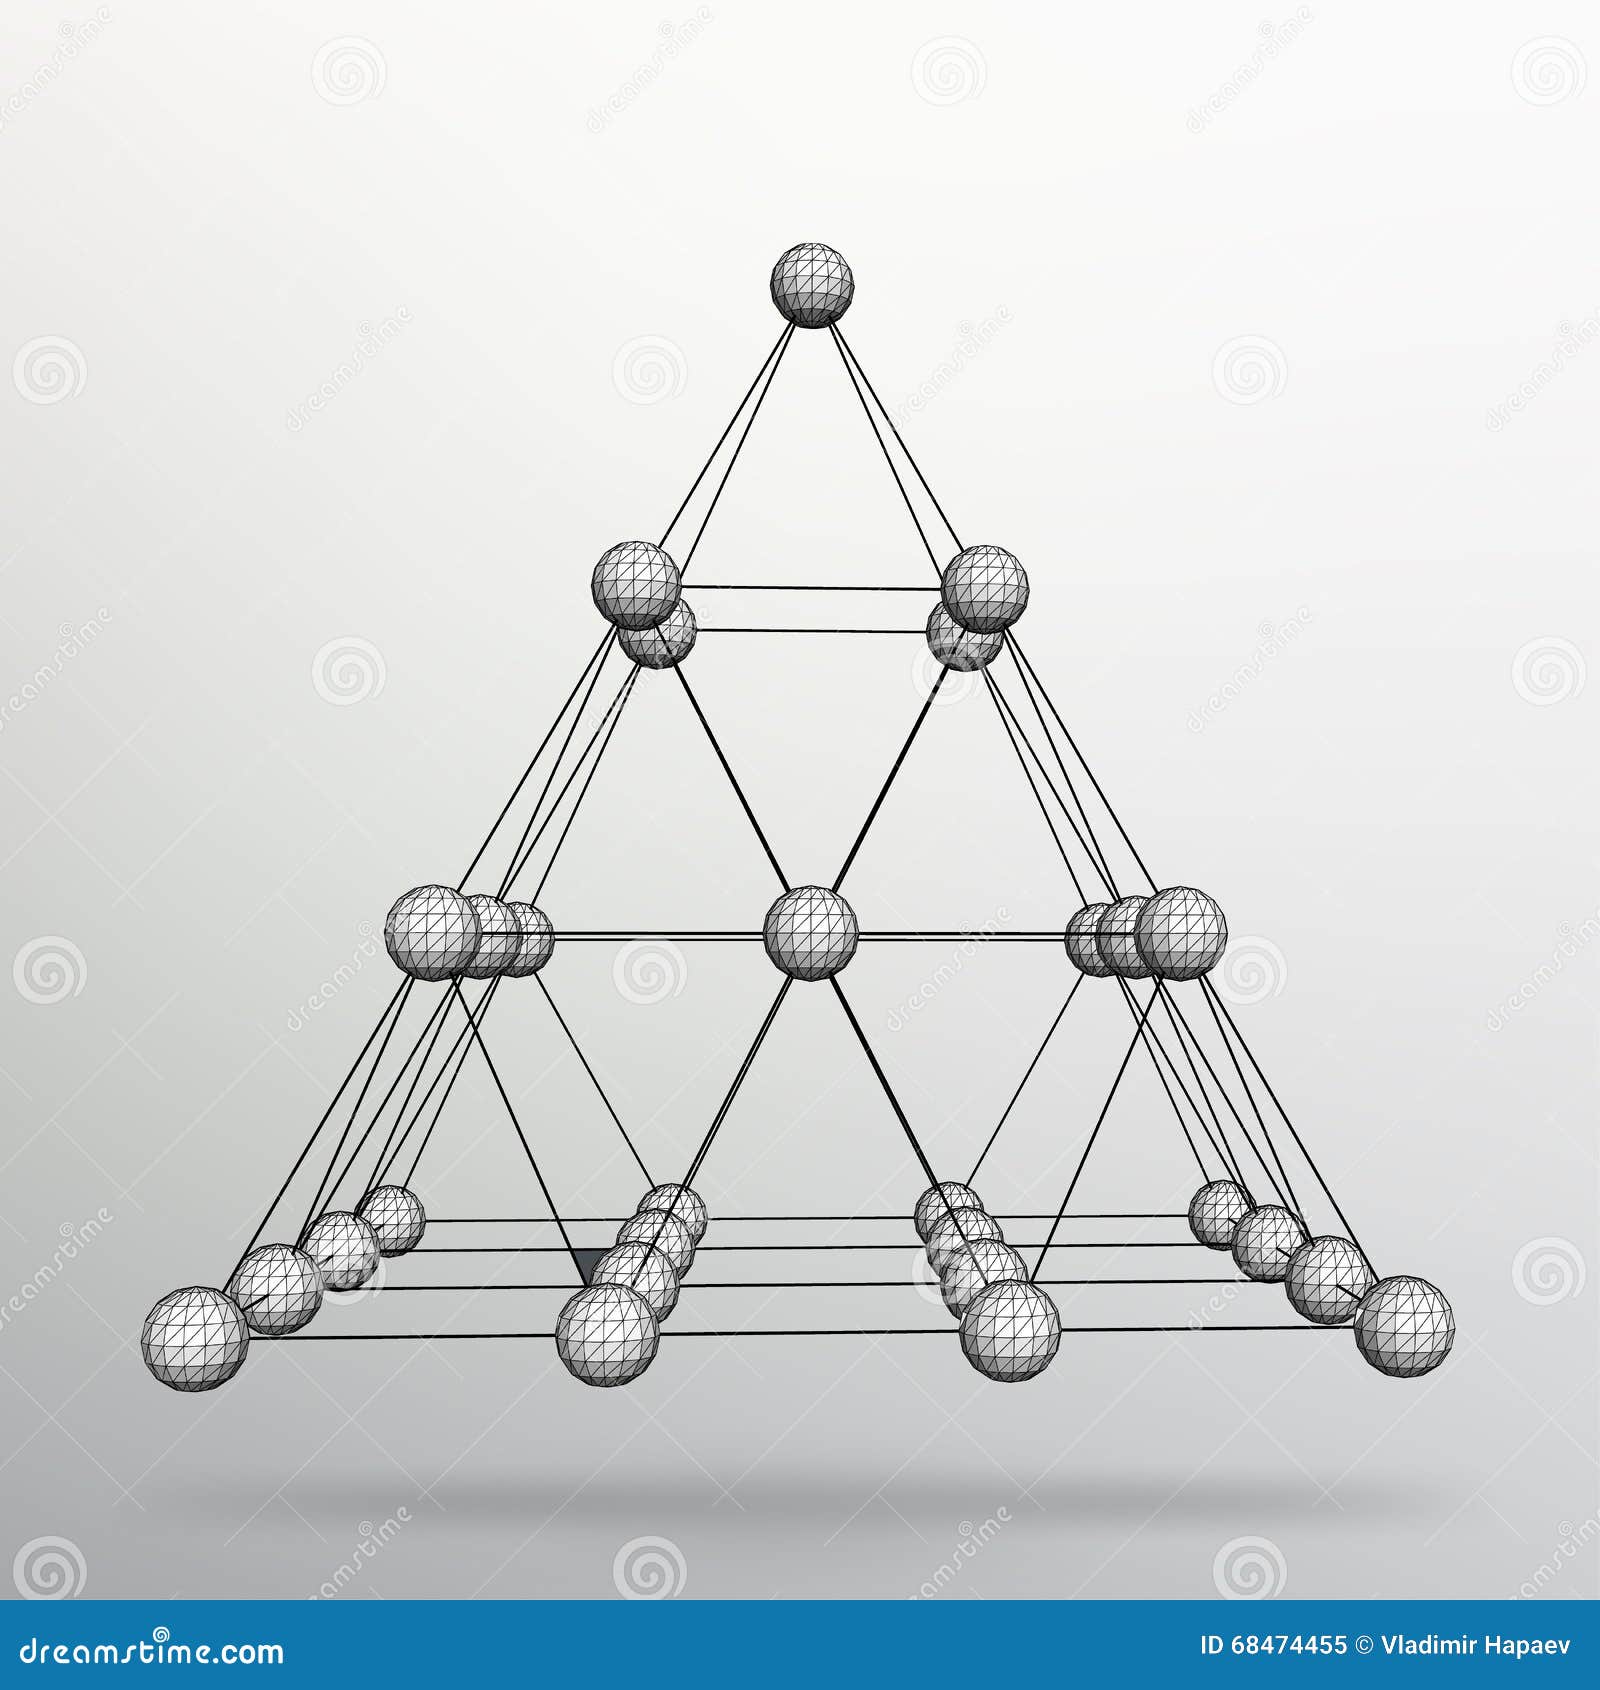 Triangle Geometrical Background. Abstract 3d Pyramid. Vector ...